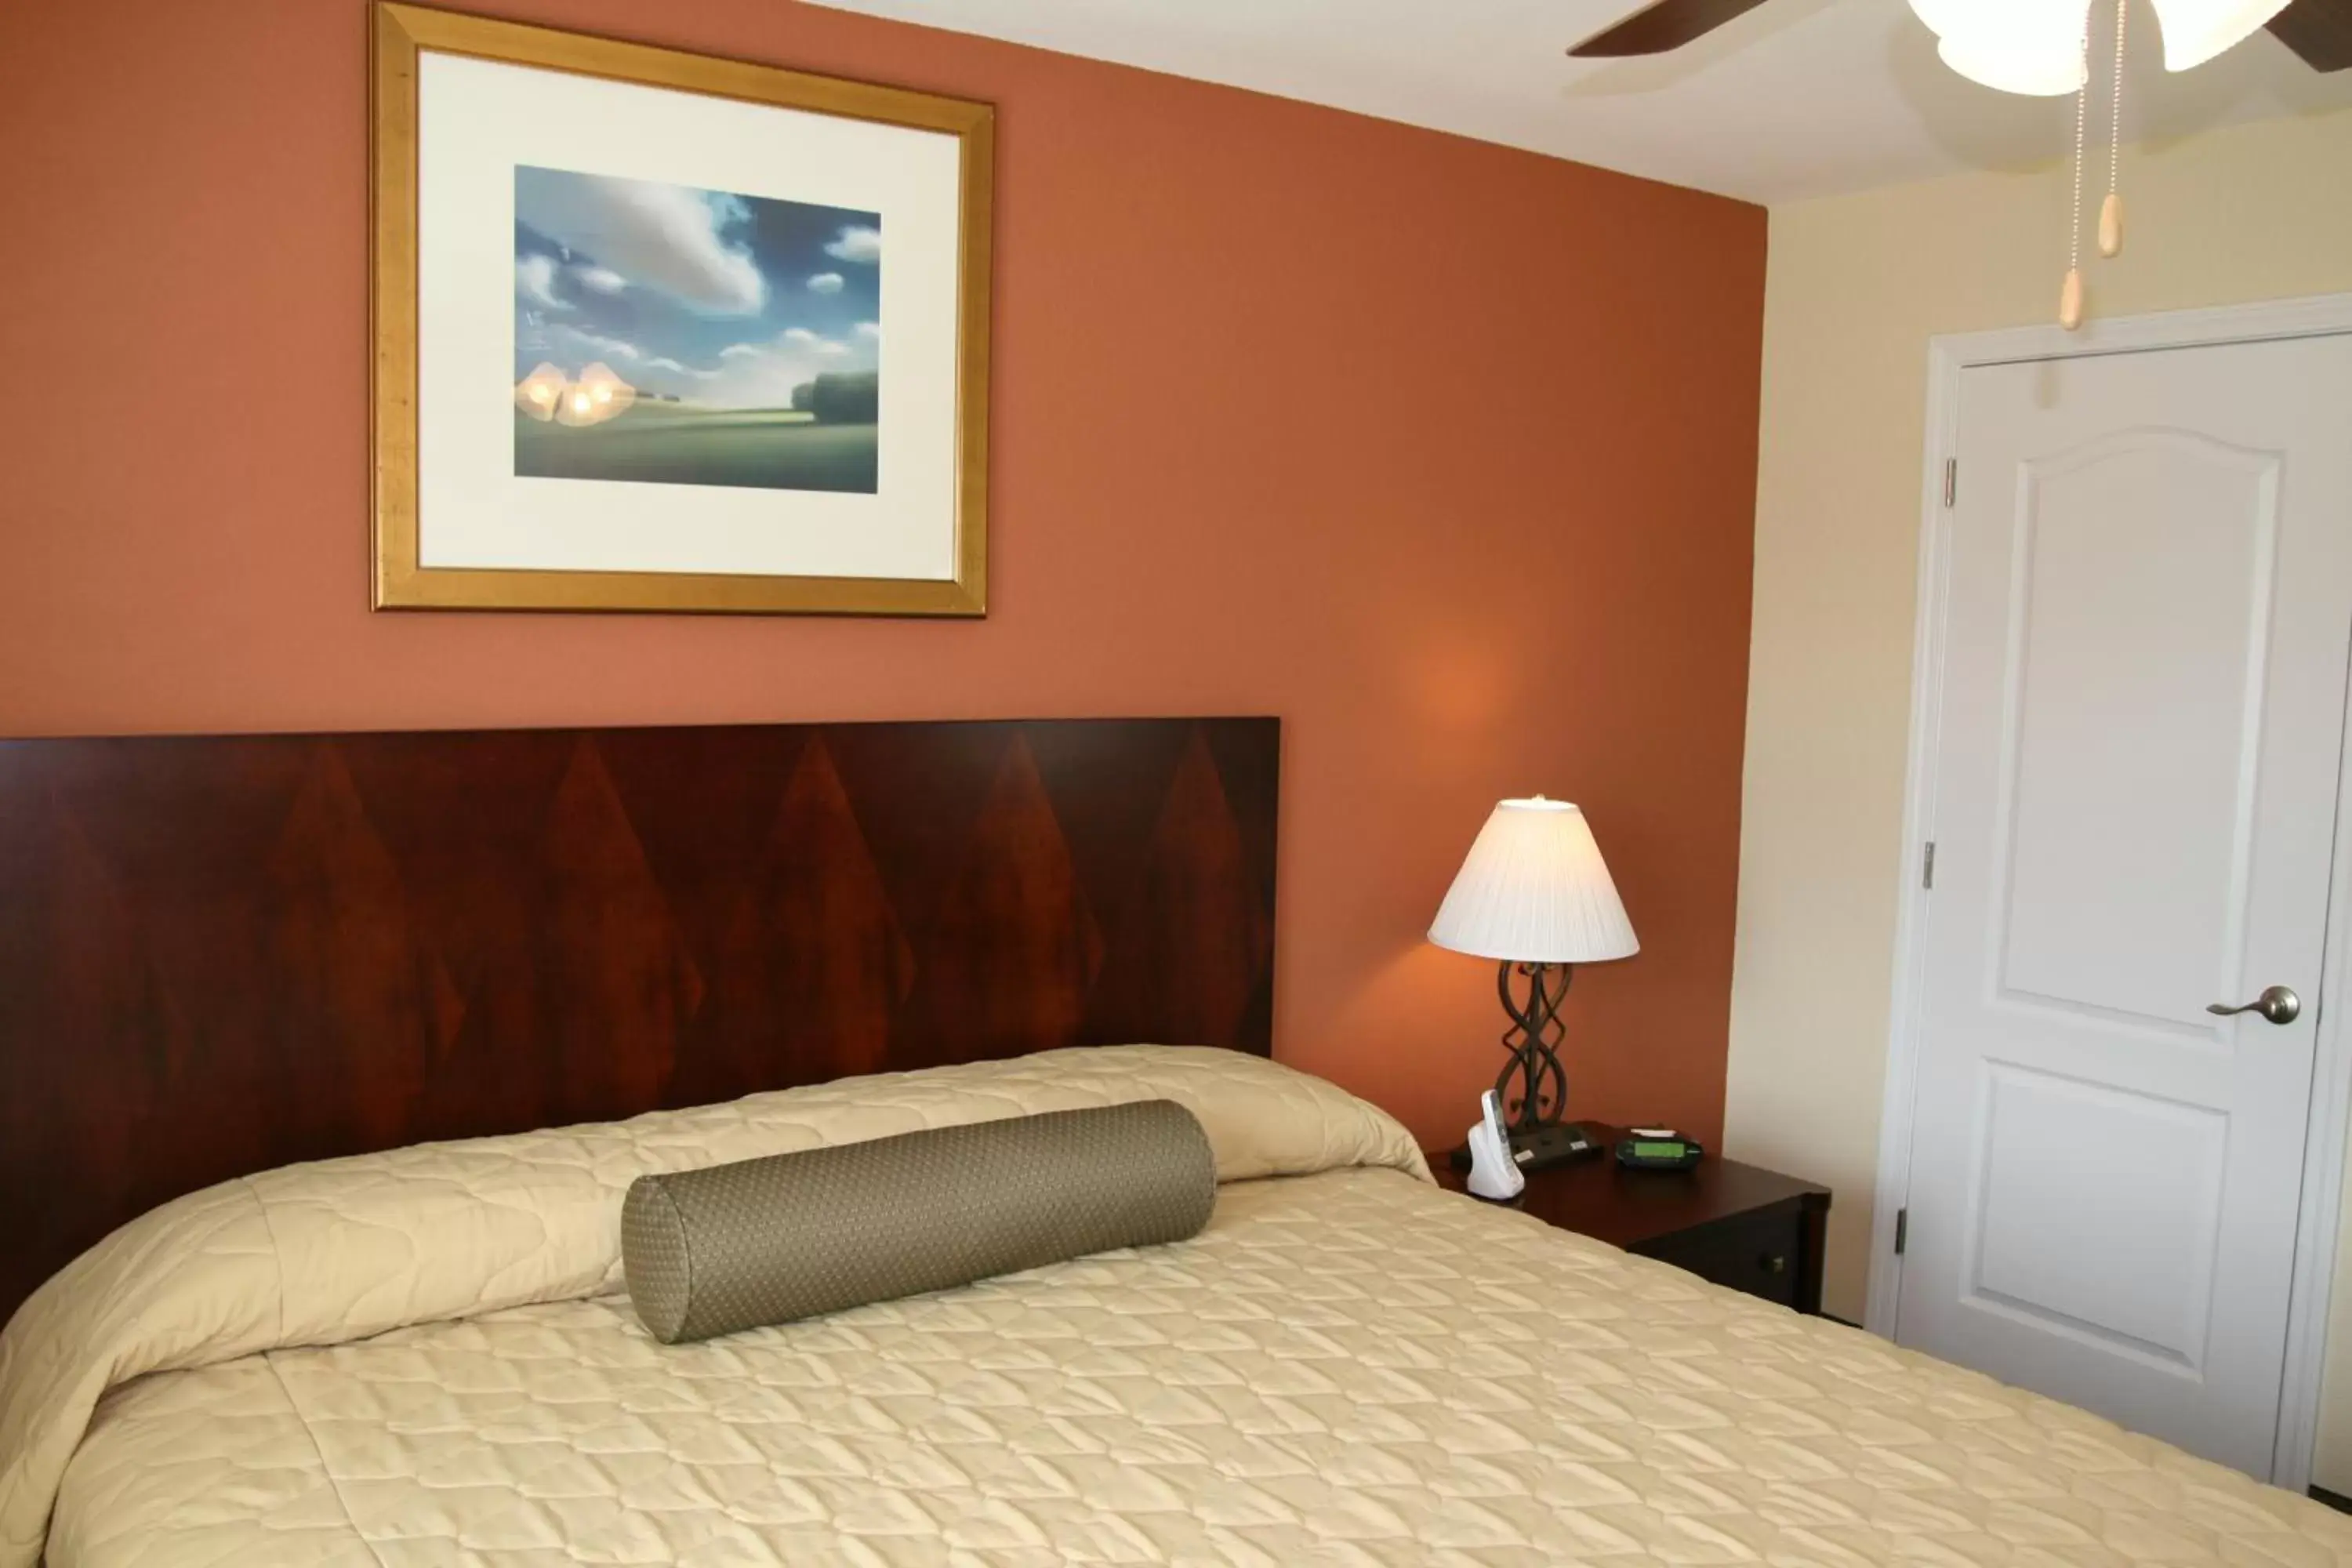 Bed in Affordable Suites Mooresville